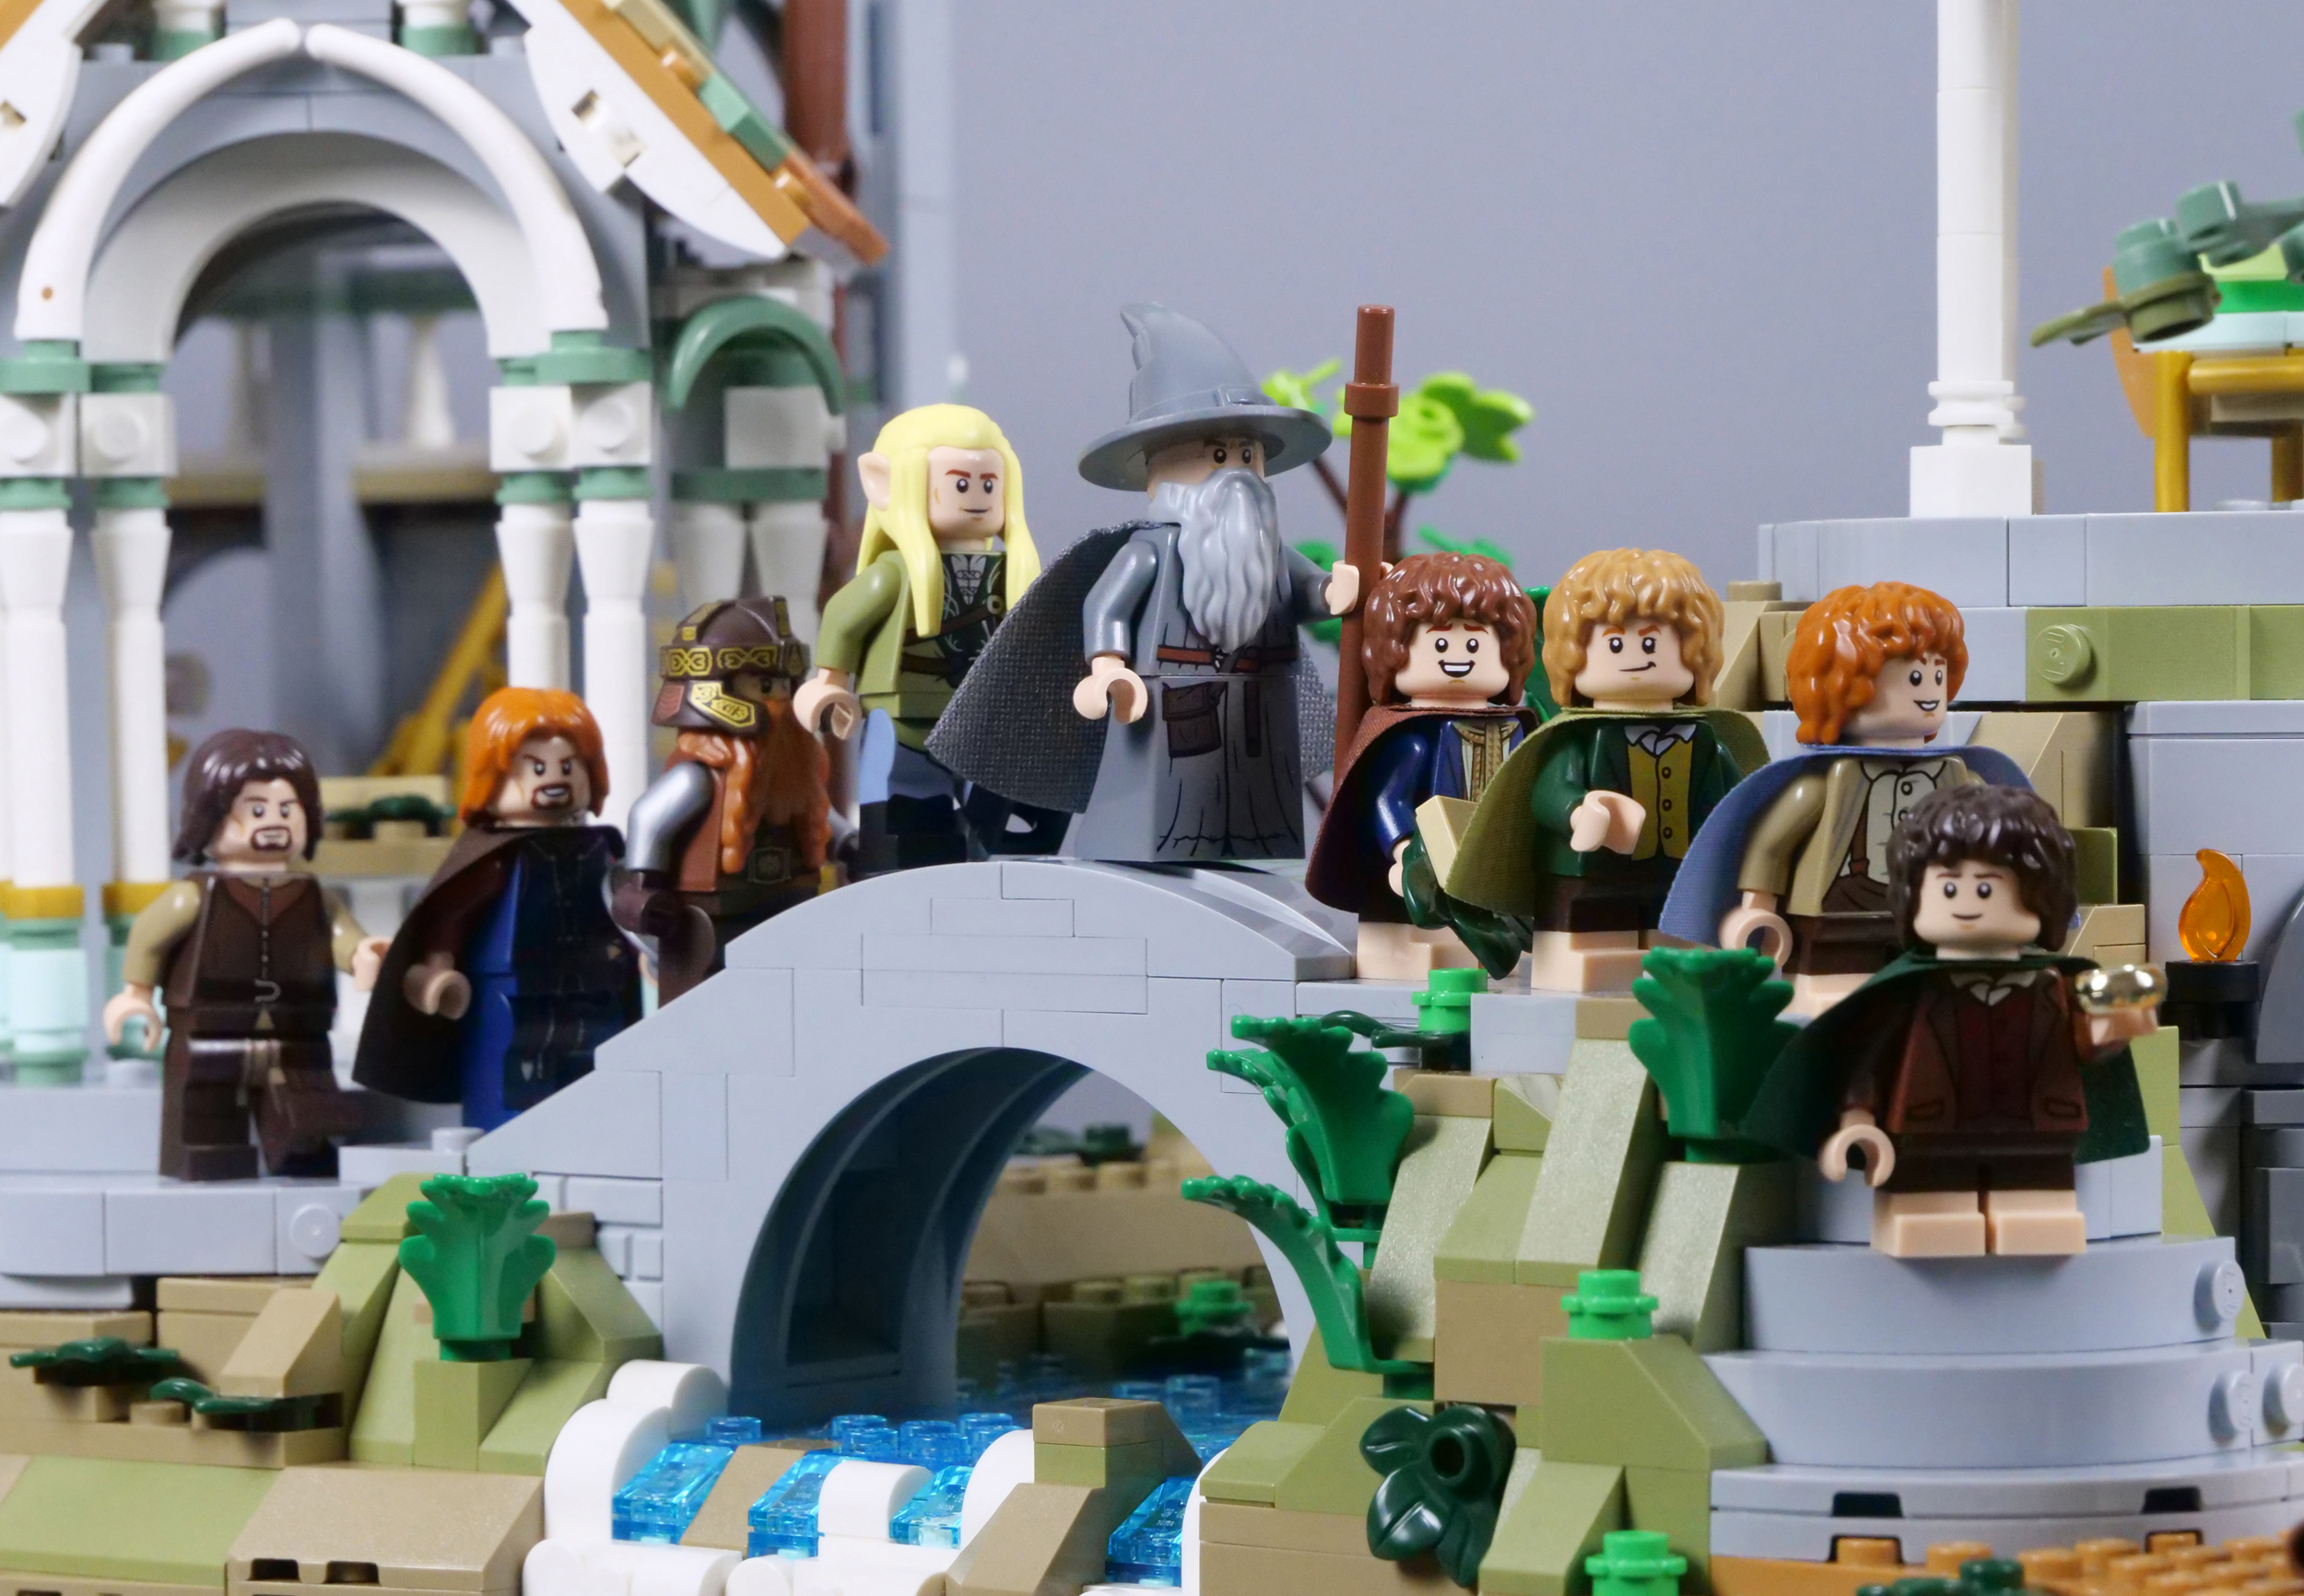 Lego the Lord of the Rings Minifigure Combo - Gandalf the Gray Wizard,  Legolas, Gimli, and Frodo Baggins (With the One Ring)